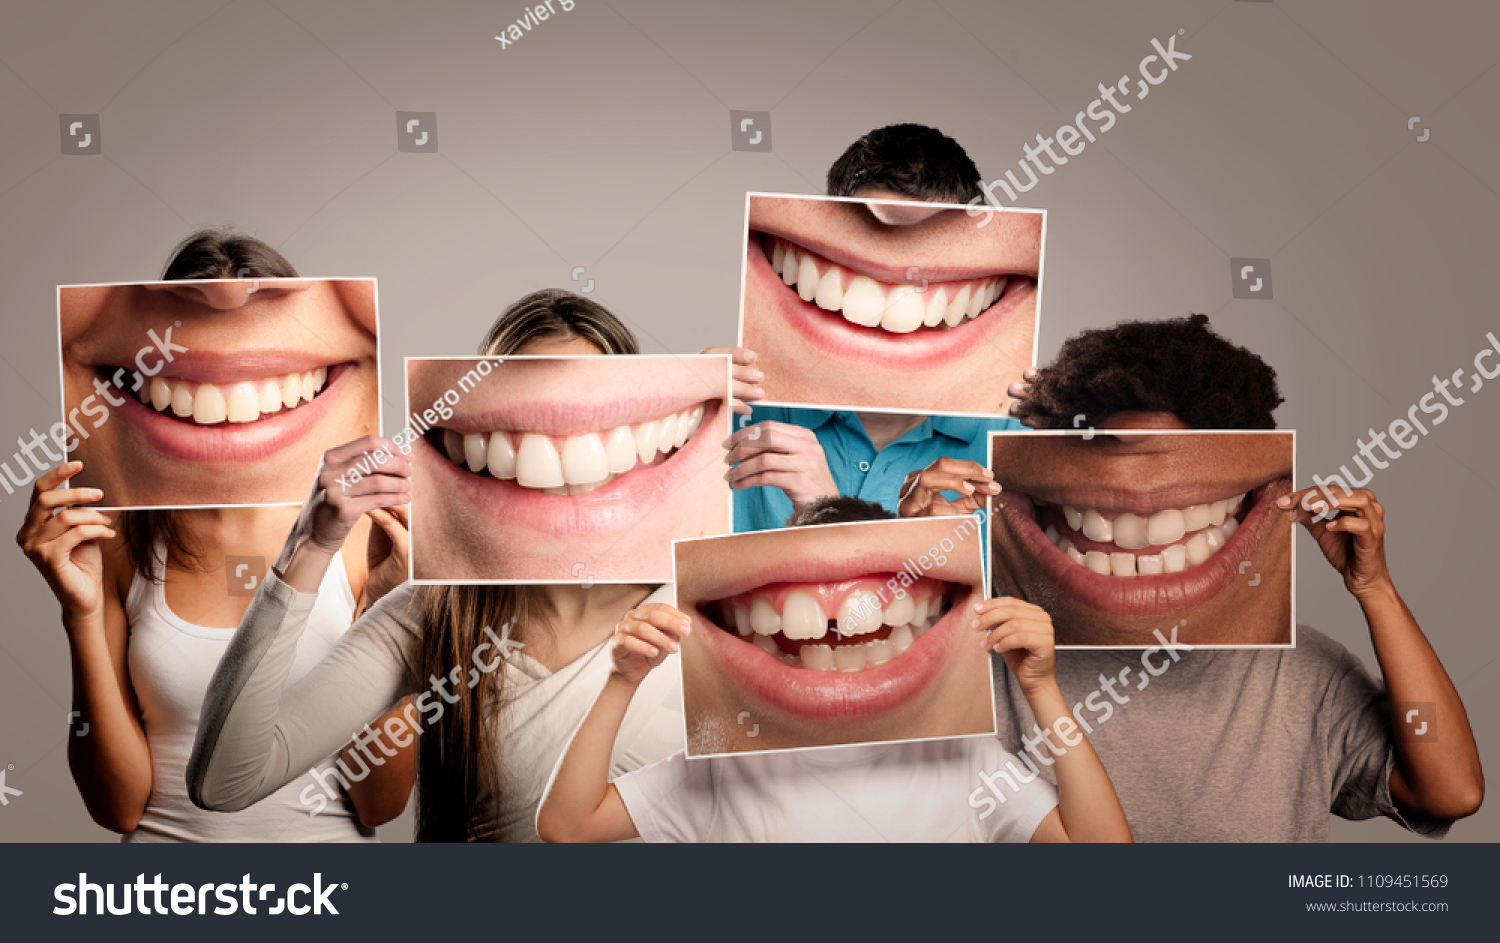 group of happy people holding a picture of a mouth smiling on a gray background #1109451569